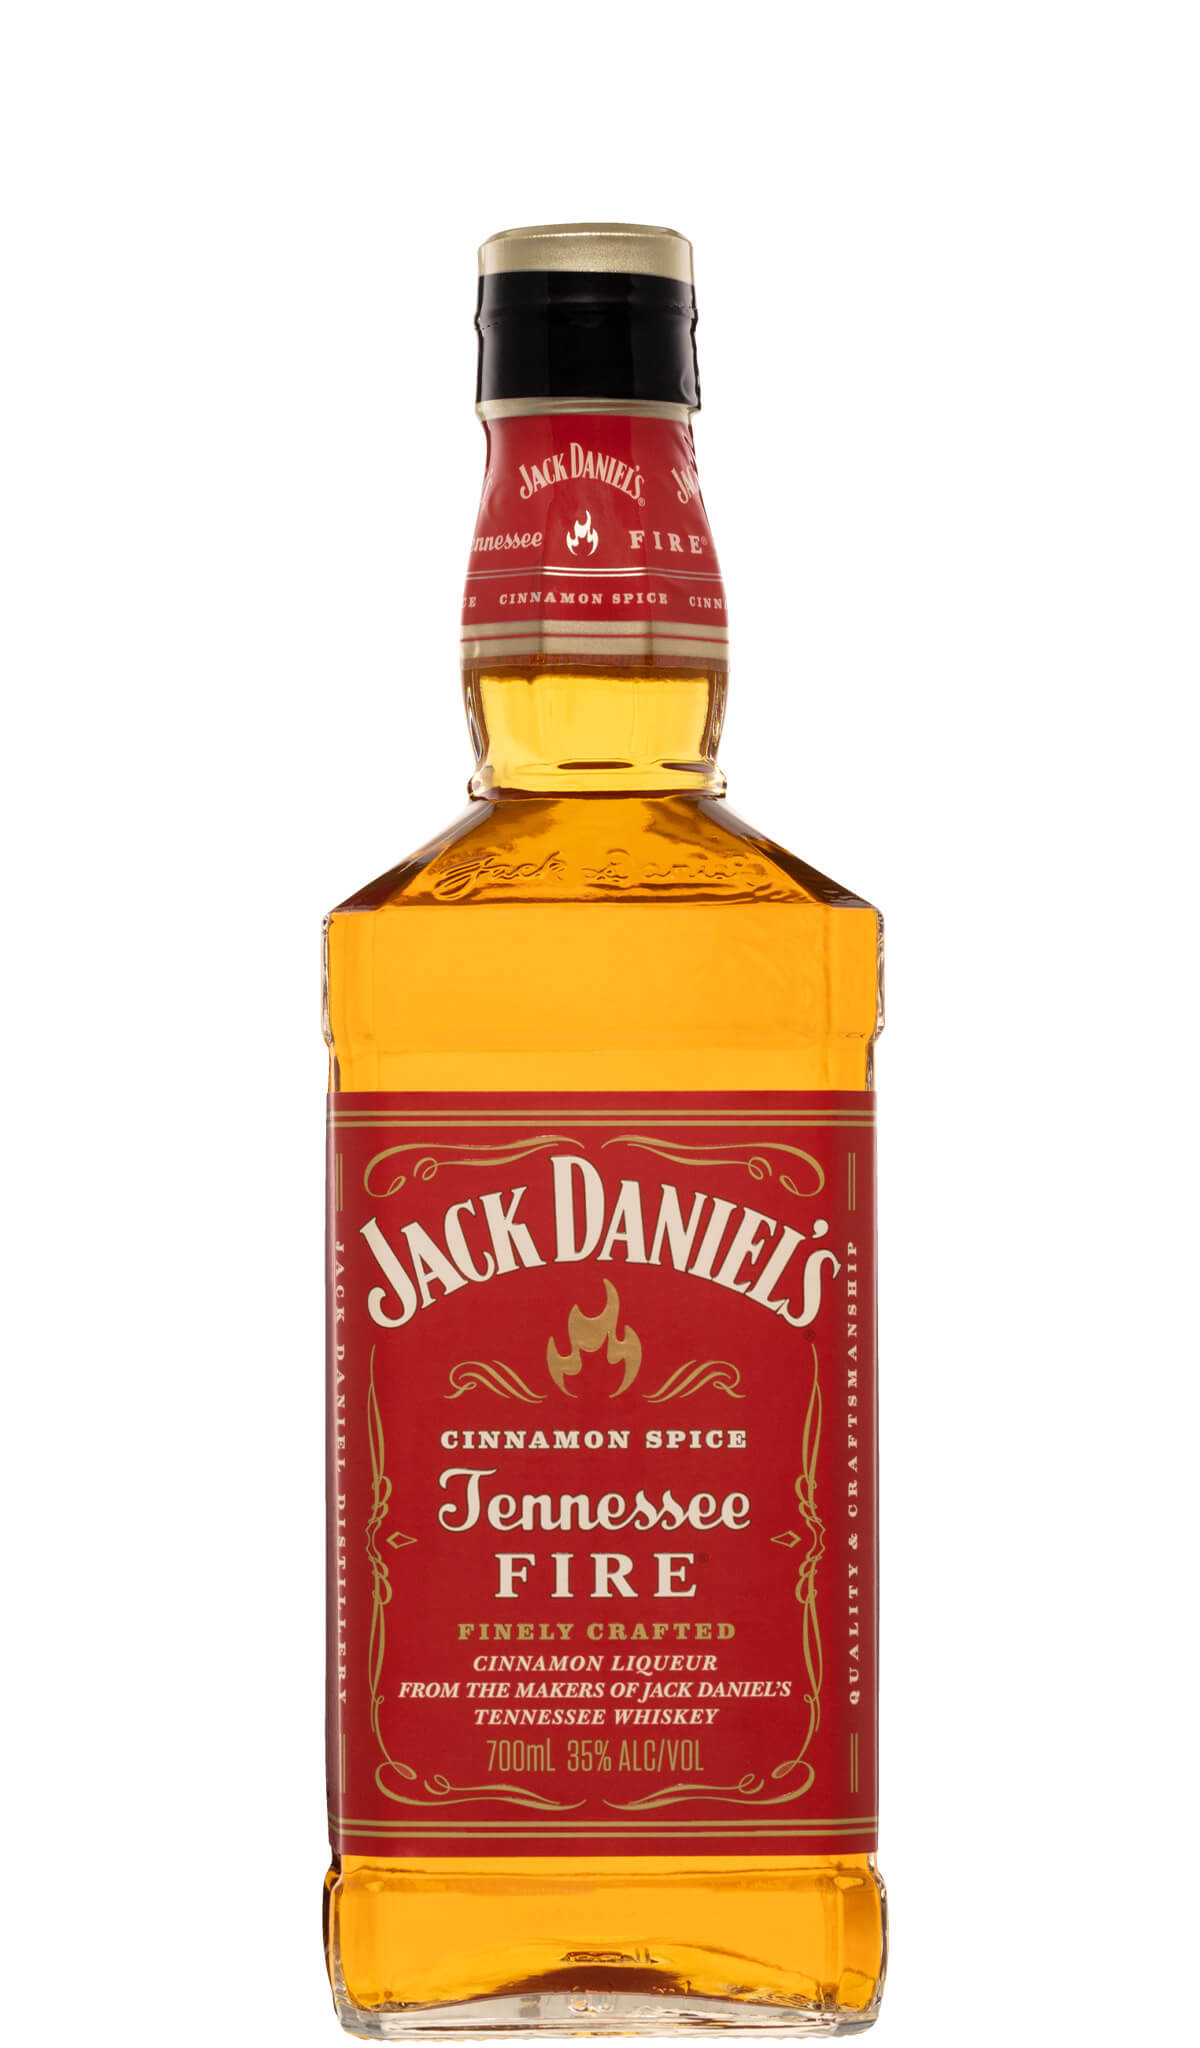 Find out more, explore the range and buy Jack Daniel’s Tennessee Fire Whiskey 700mL available online at Wine Sellers Direct - Australia's independent liquor specialists.